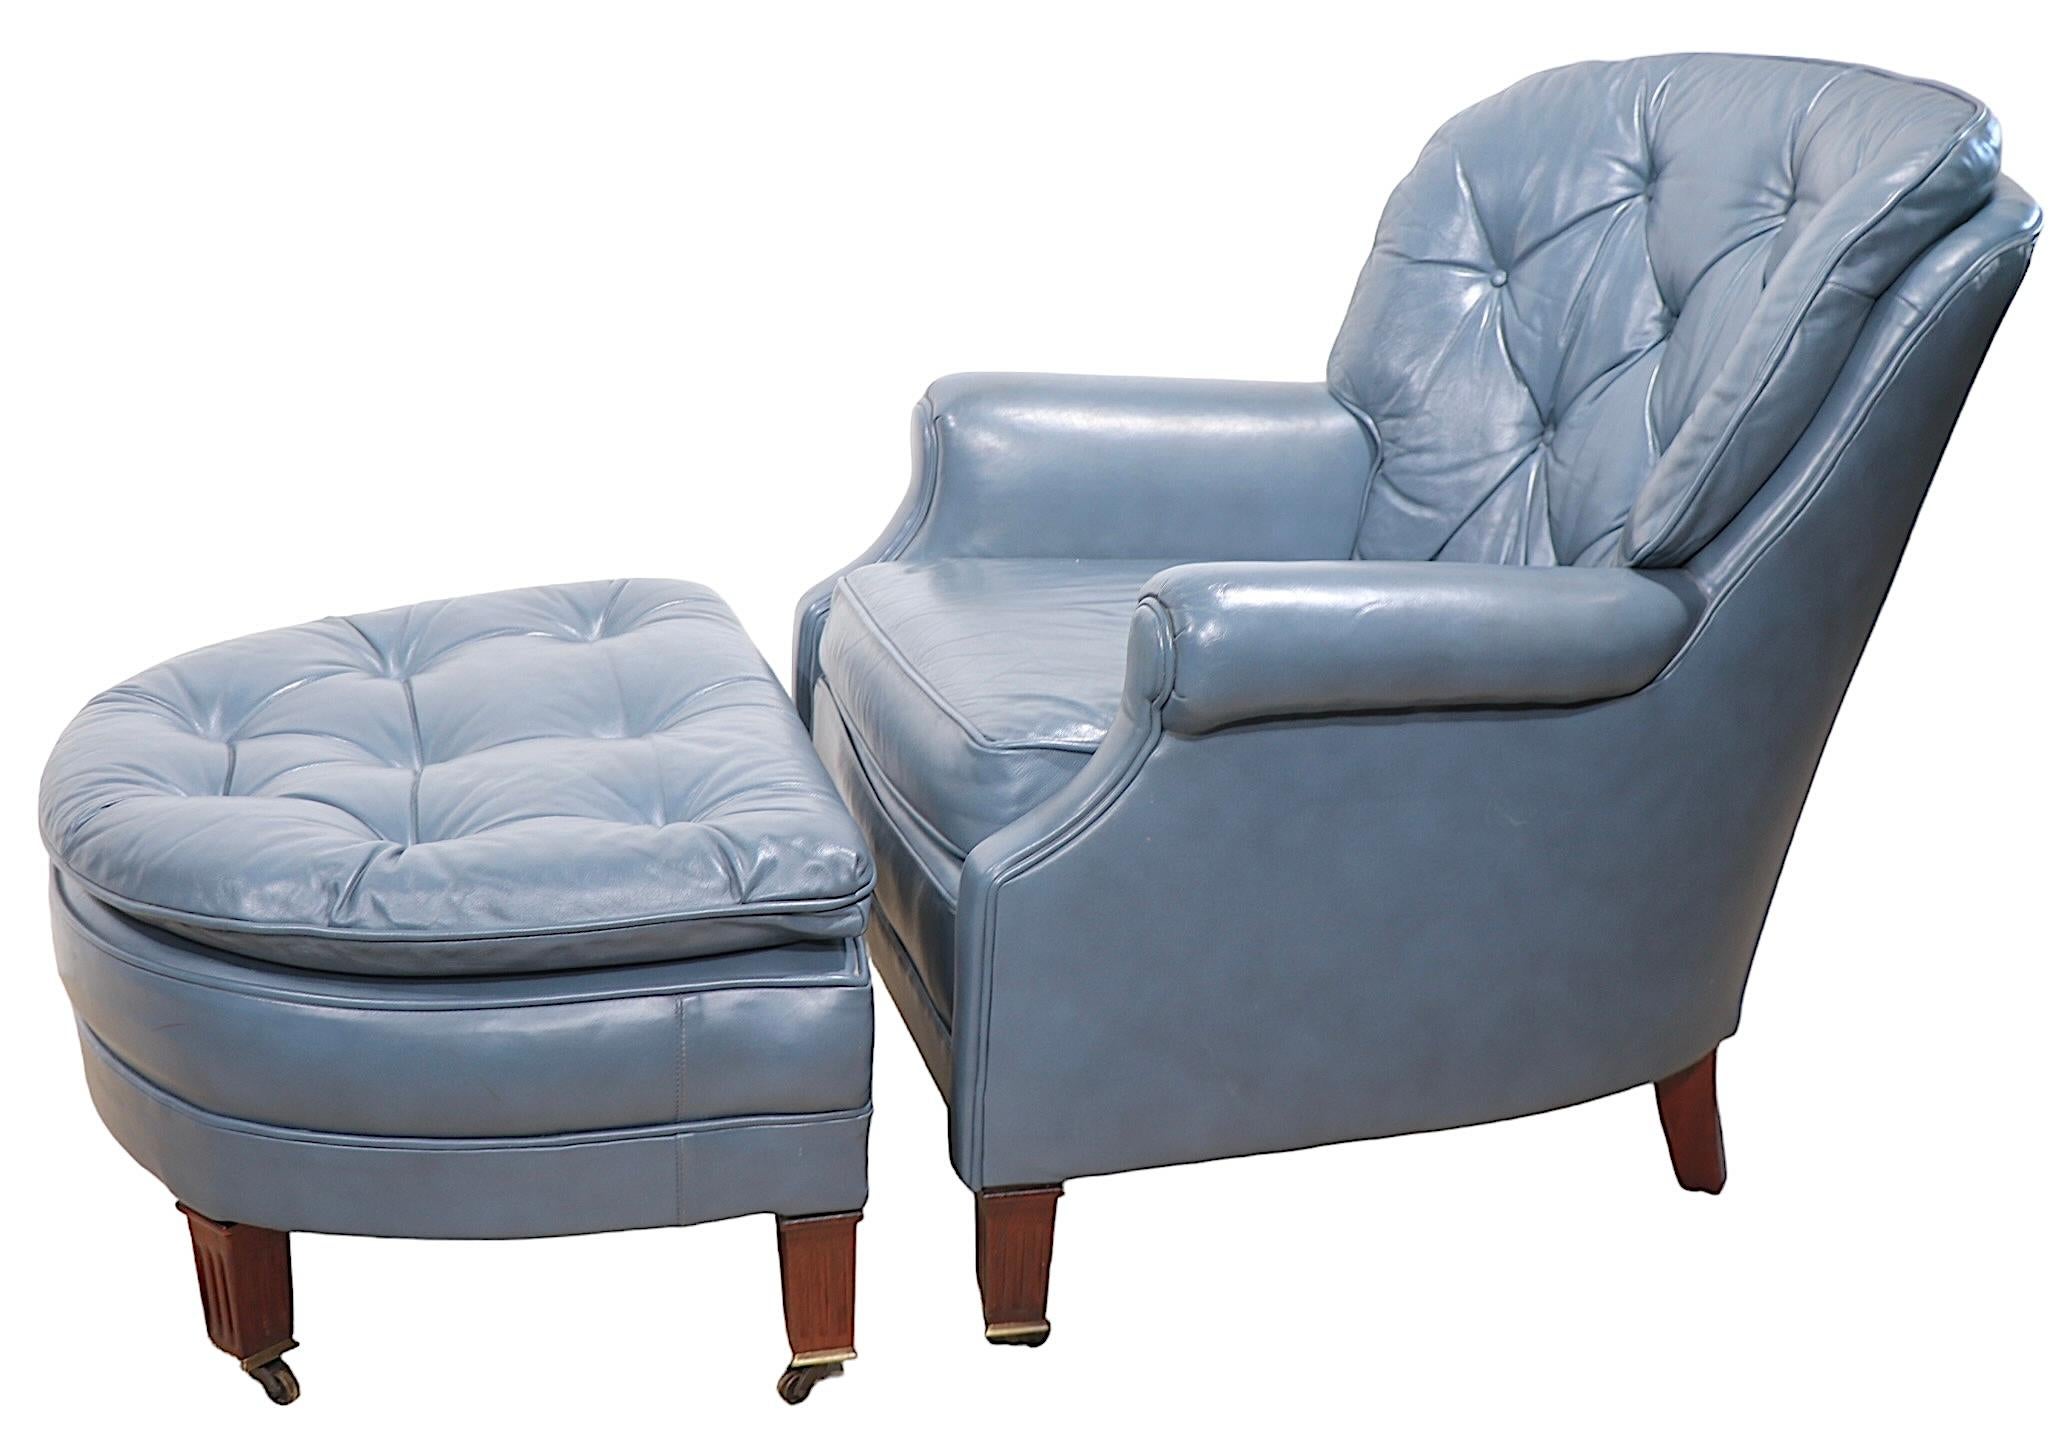 Chic, sophisticated and comfortable, leather lounge chair, with matching ottoman by Classic Leather circa 1950/1960's. The chair and ottoman feature  intriguing dark tone blue leather upholstery, with solid wood fluted tapering less, and cast metal